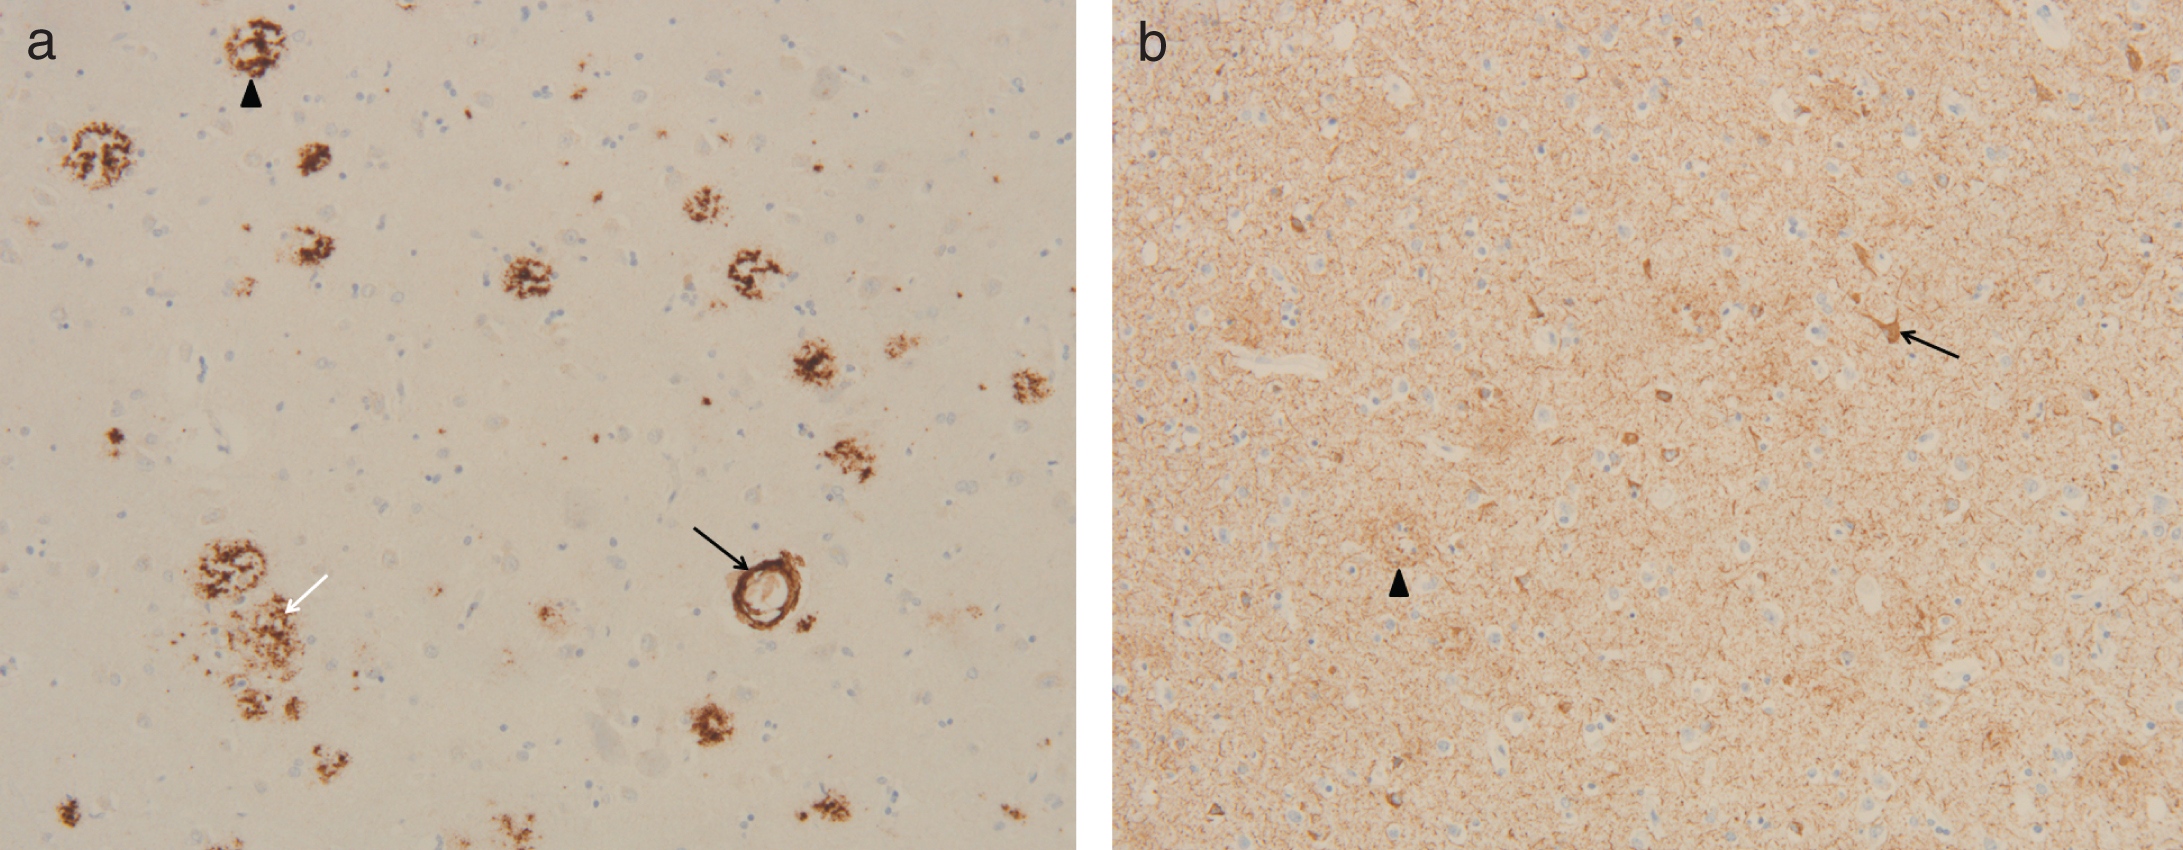 Immunohistochemistry in temporal cortex of subject II.4. a) Immunohistochemical staining for Aβ reveals cerebral Aβ angiopathy (black arrow), classical plaques (arrow head), and diffuse plaques (white arrow) in the temporal cortex (10x obj.); b) Immunohistochemical staining for tau (mab AT8) reveals neuropil threads, (pre)tangles (arrow), and neuritic plaques (arrow head) in the temporal cortex (10x obj.).